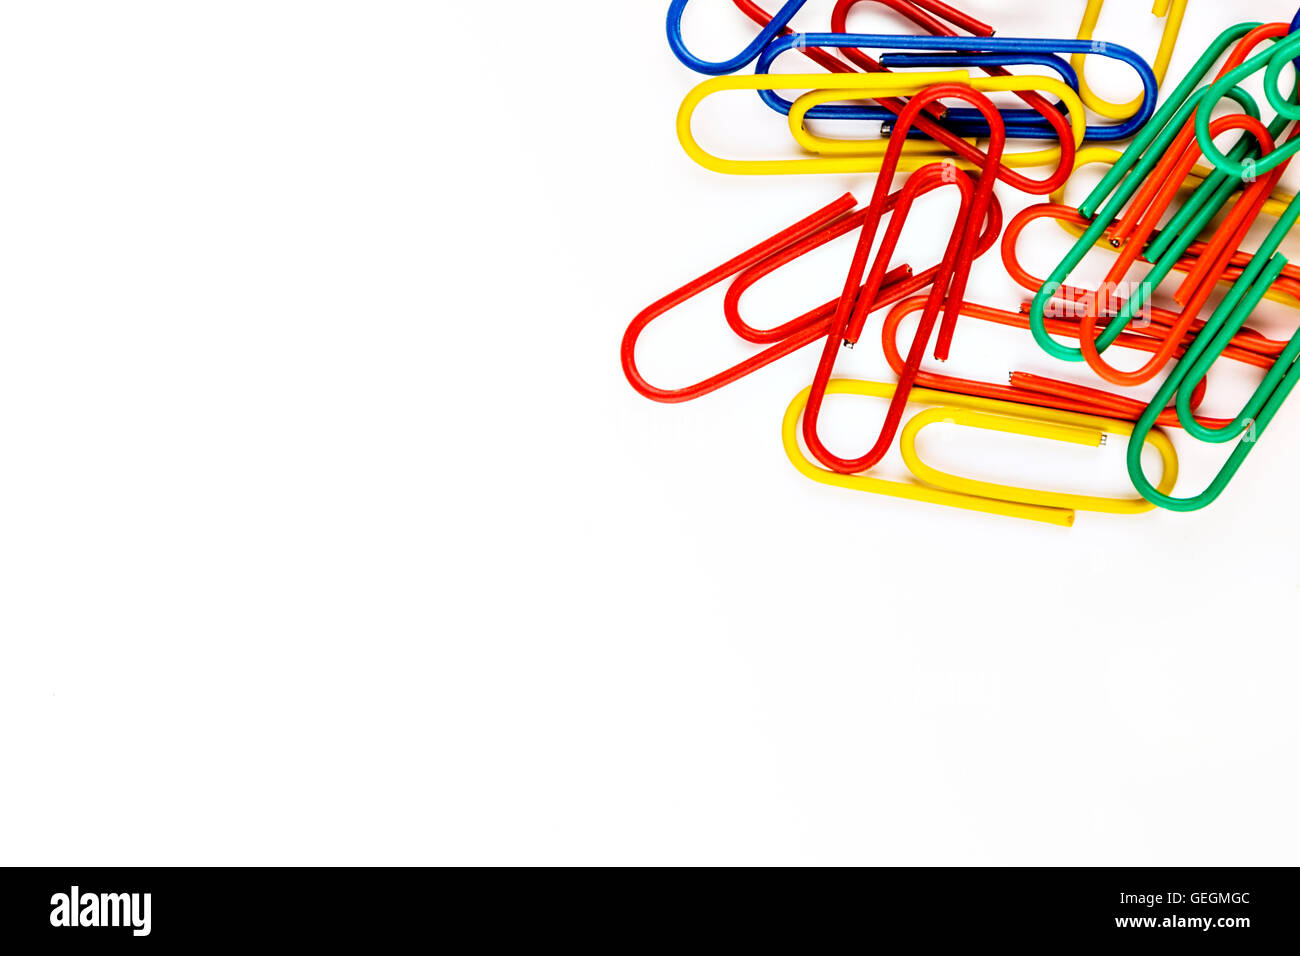 Colorful paper clips on white background. Horizontal image. Stock Photo